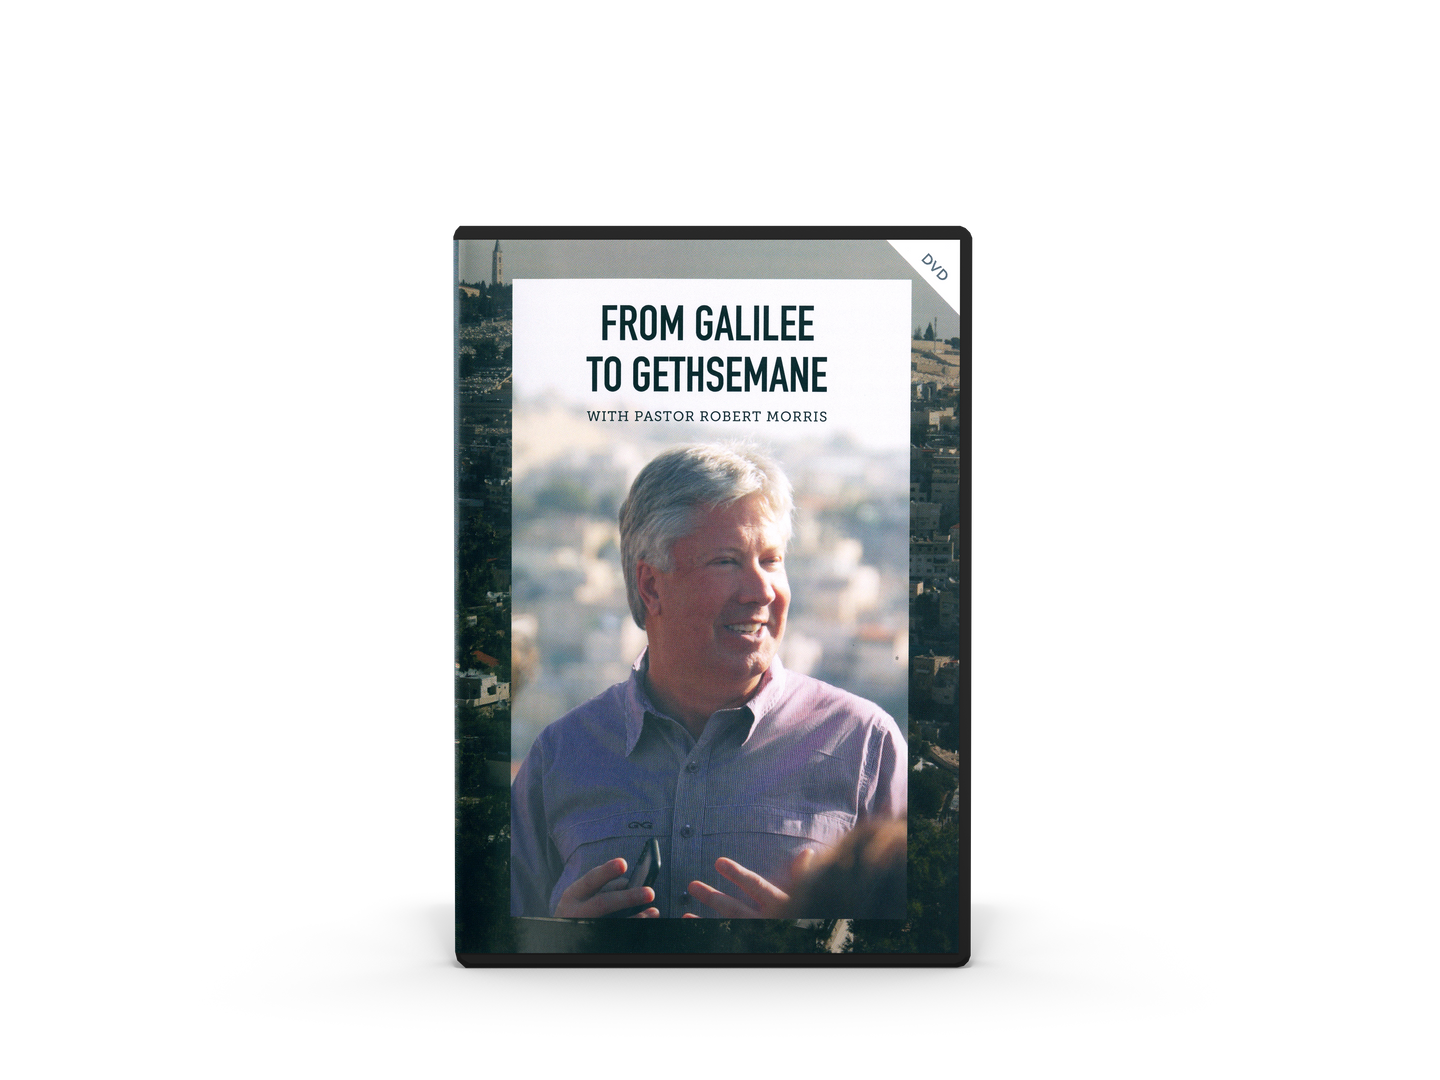 From Galilee to Gethsemane DVD